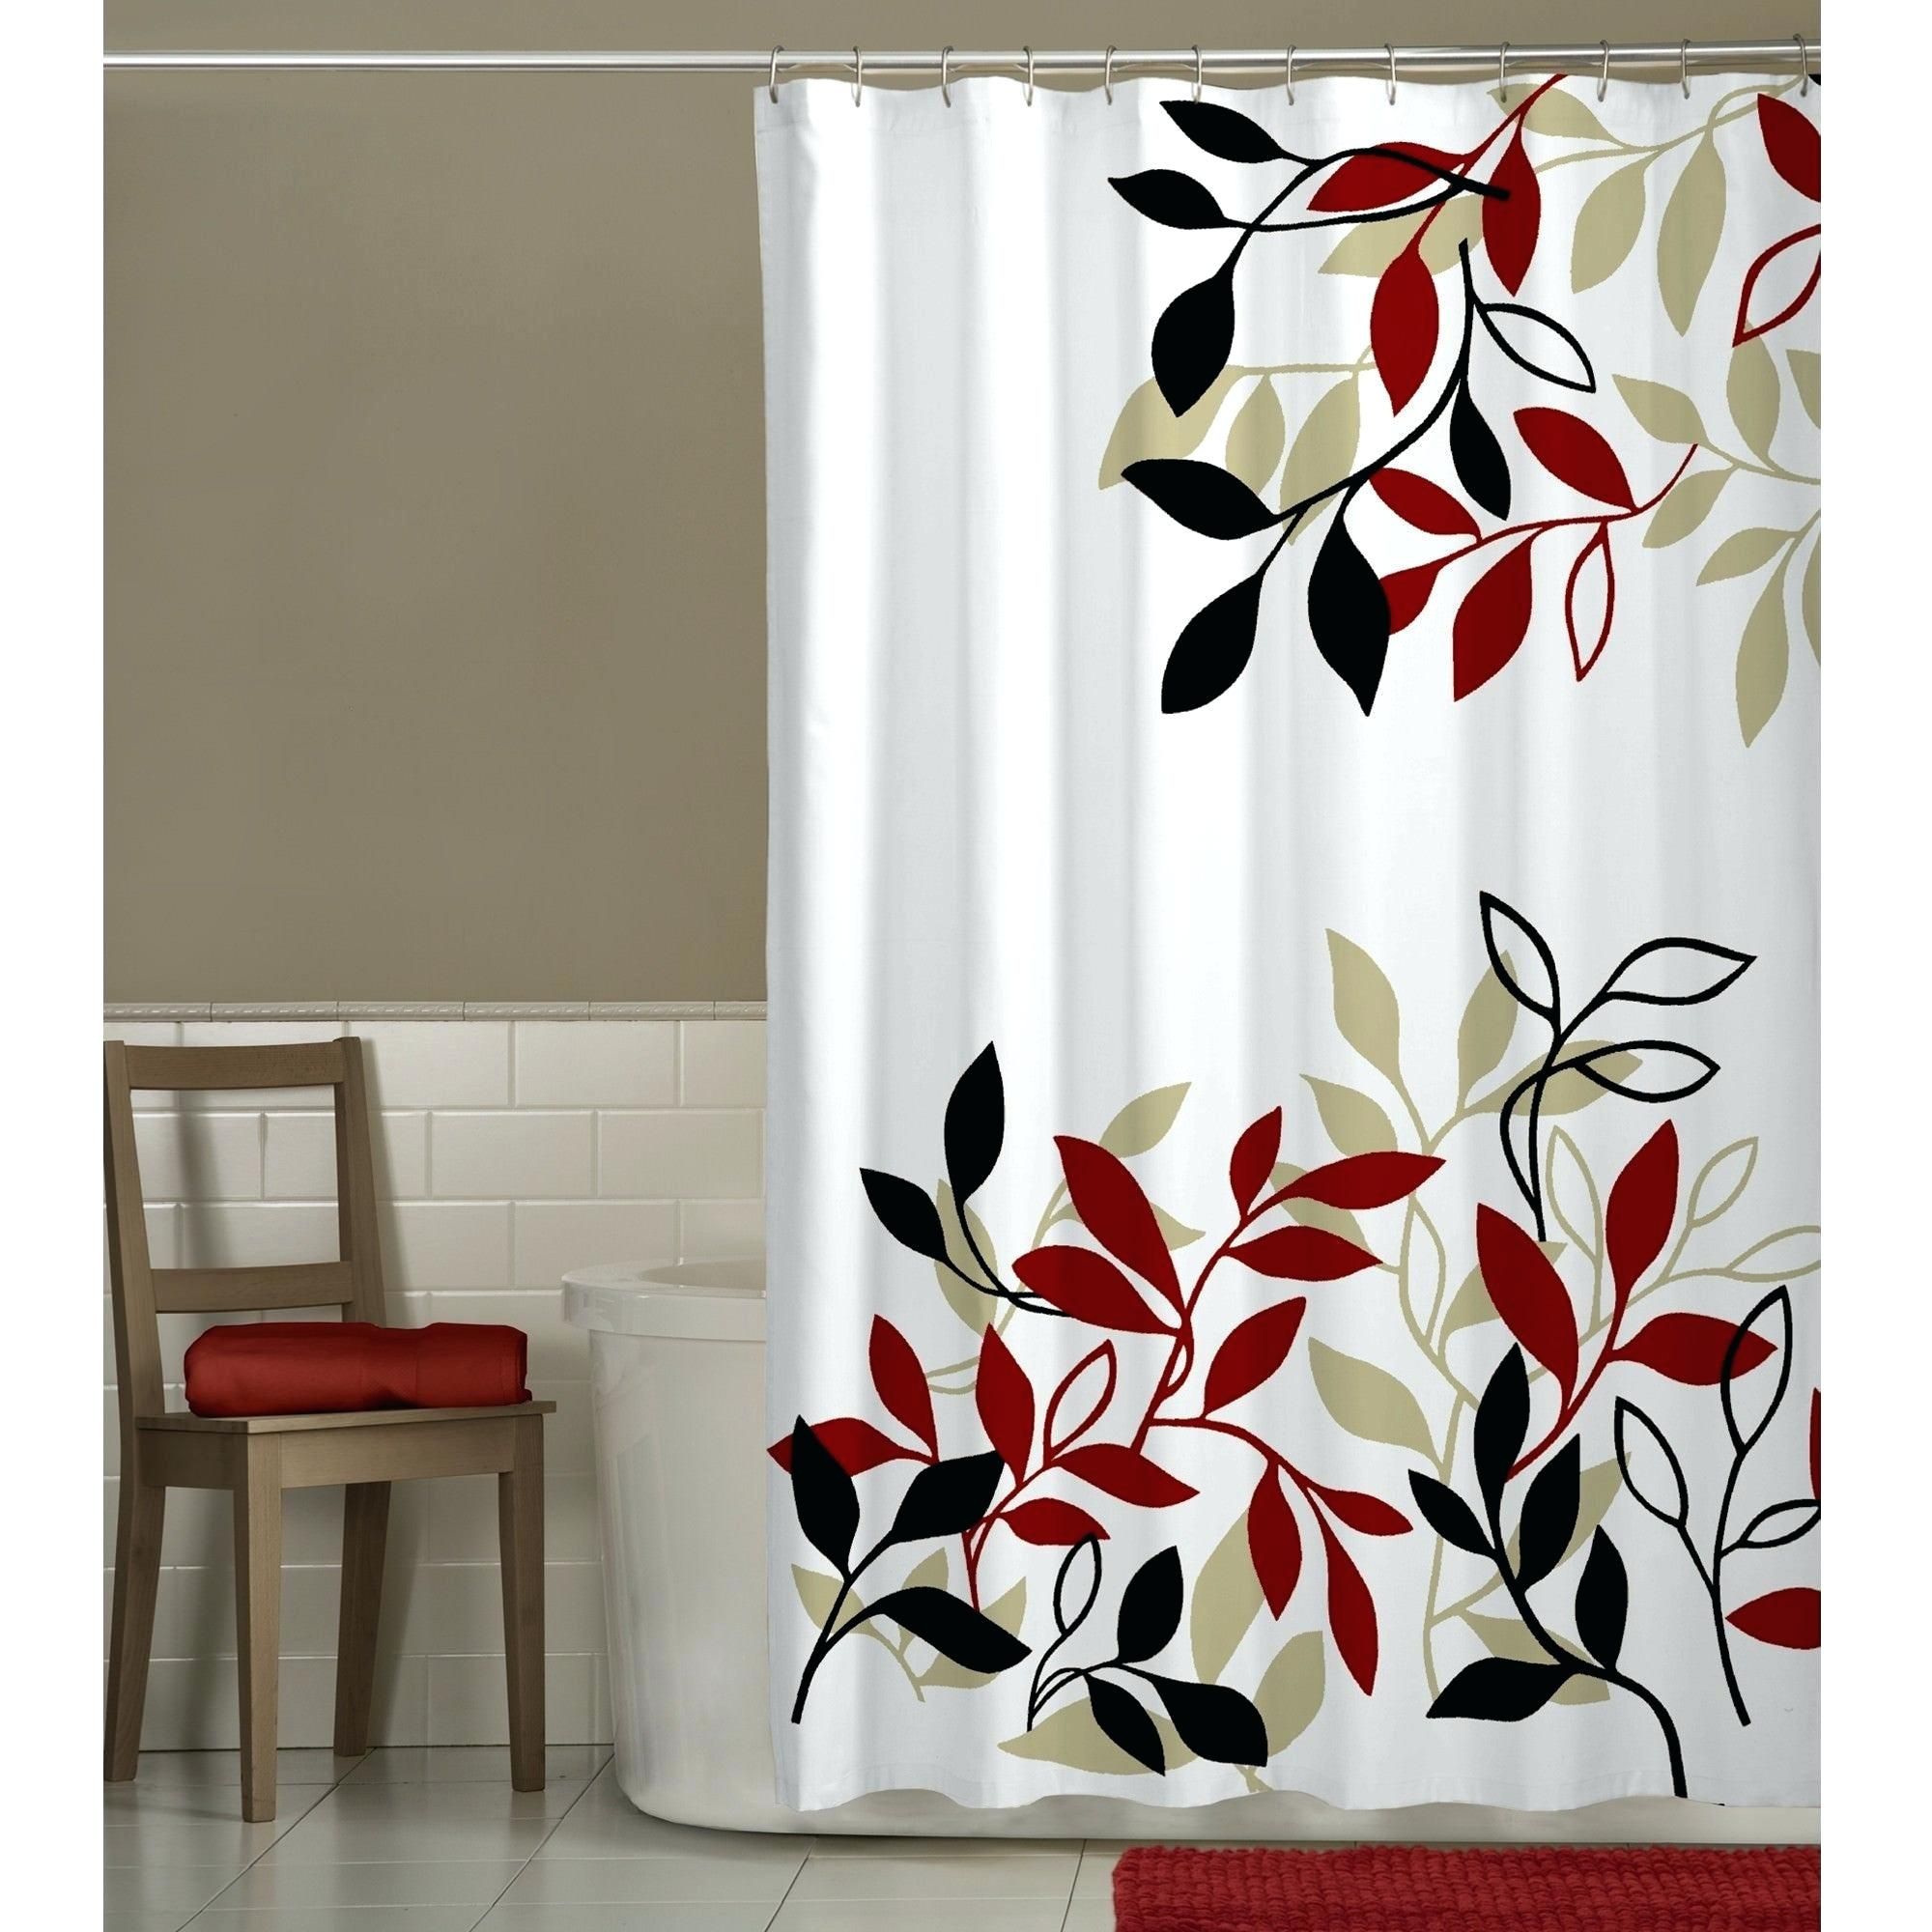 Bathrooms Design : Cheap Rustic Shower Curtains Satori With Regard To Red Rustic Kitchen Curtains (View 17 of 20)